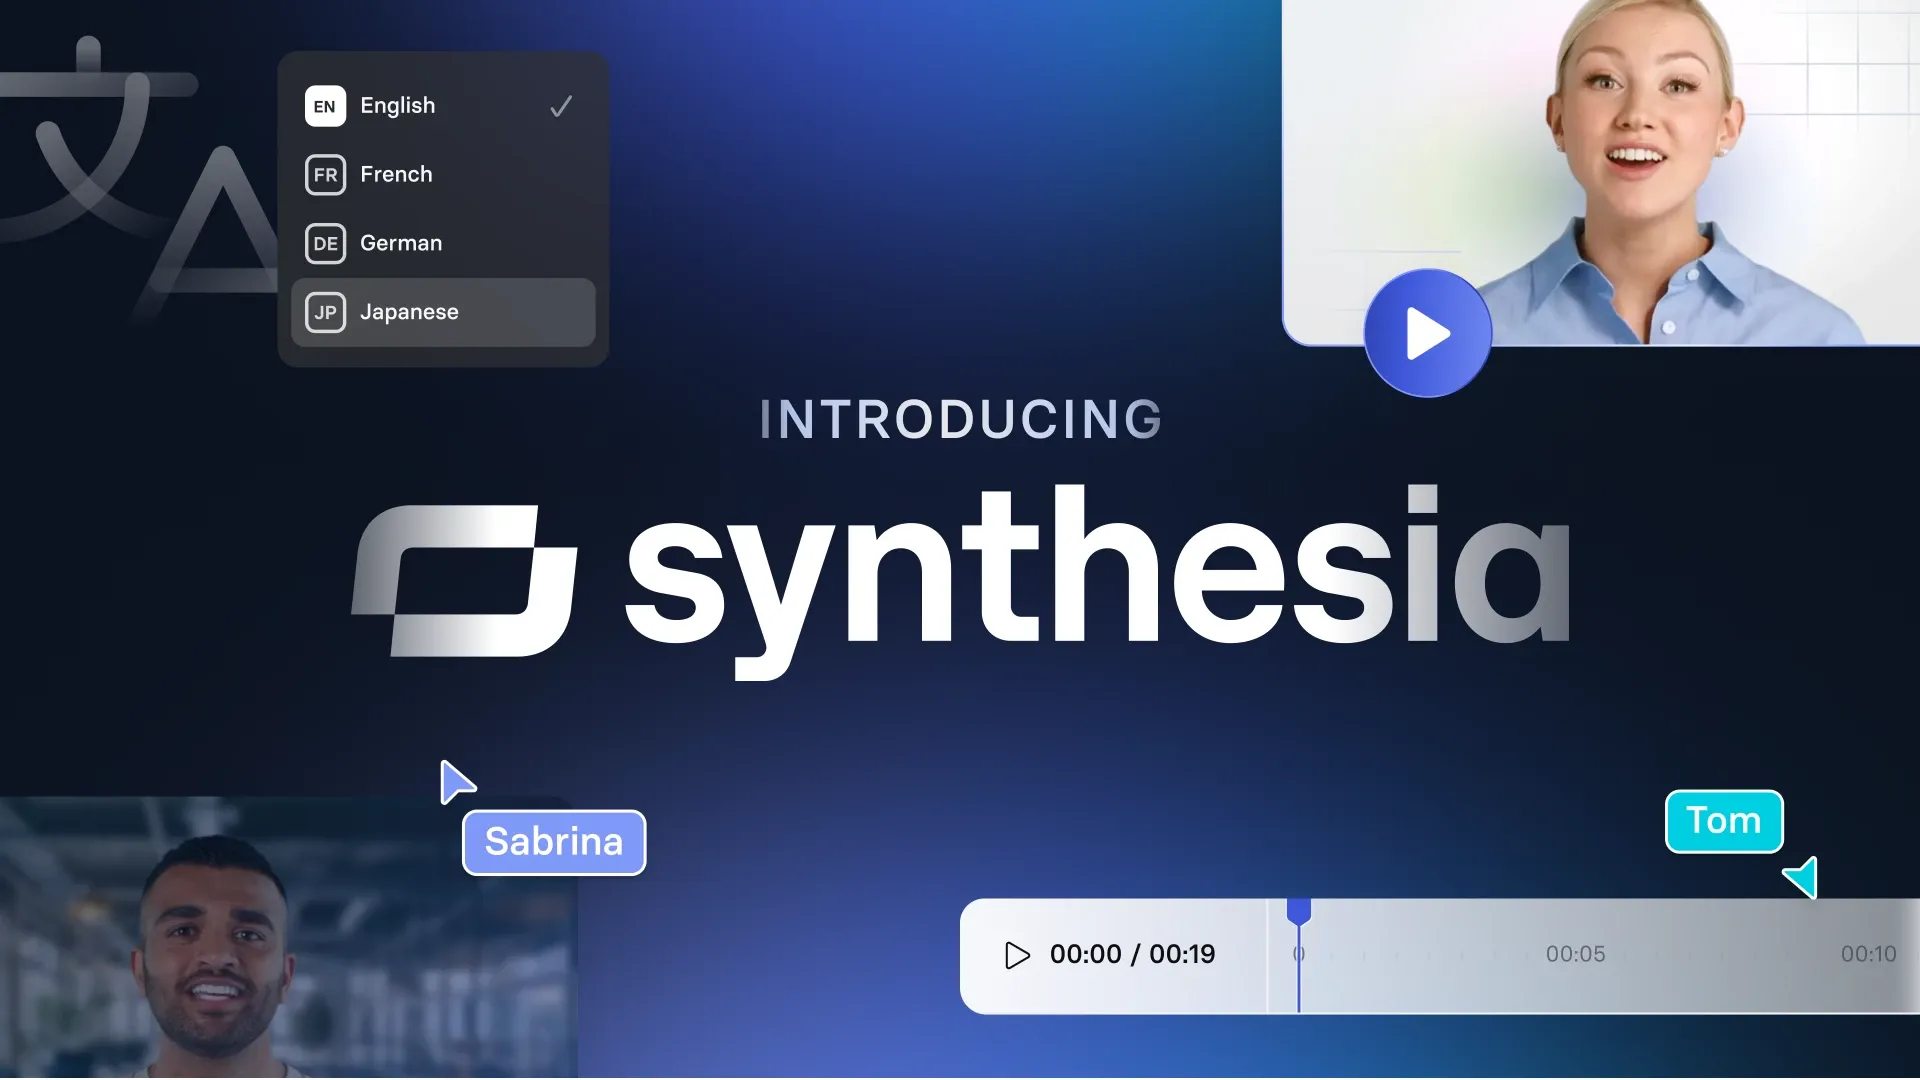 Synthesia platform upgrade brings full-body avatars, new AI Video Assistant features, and more